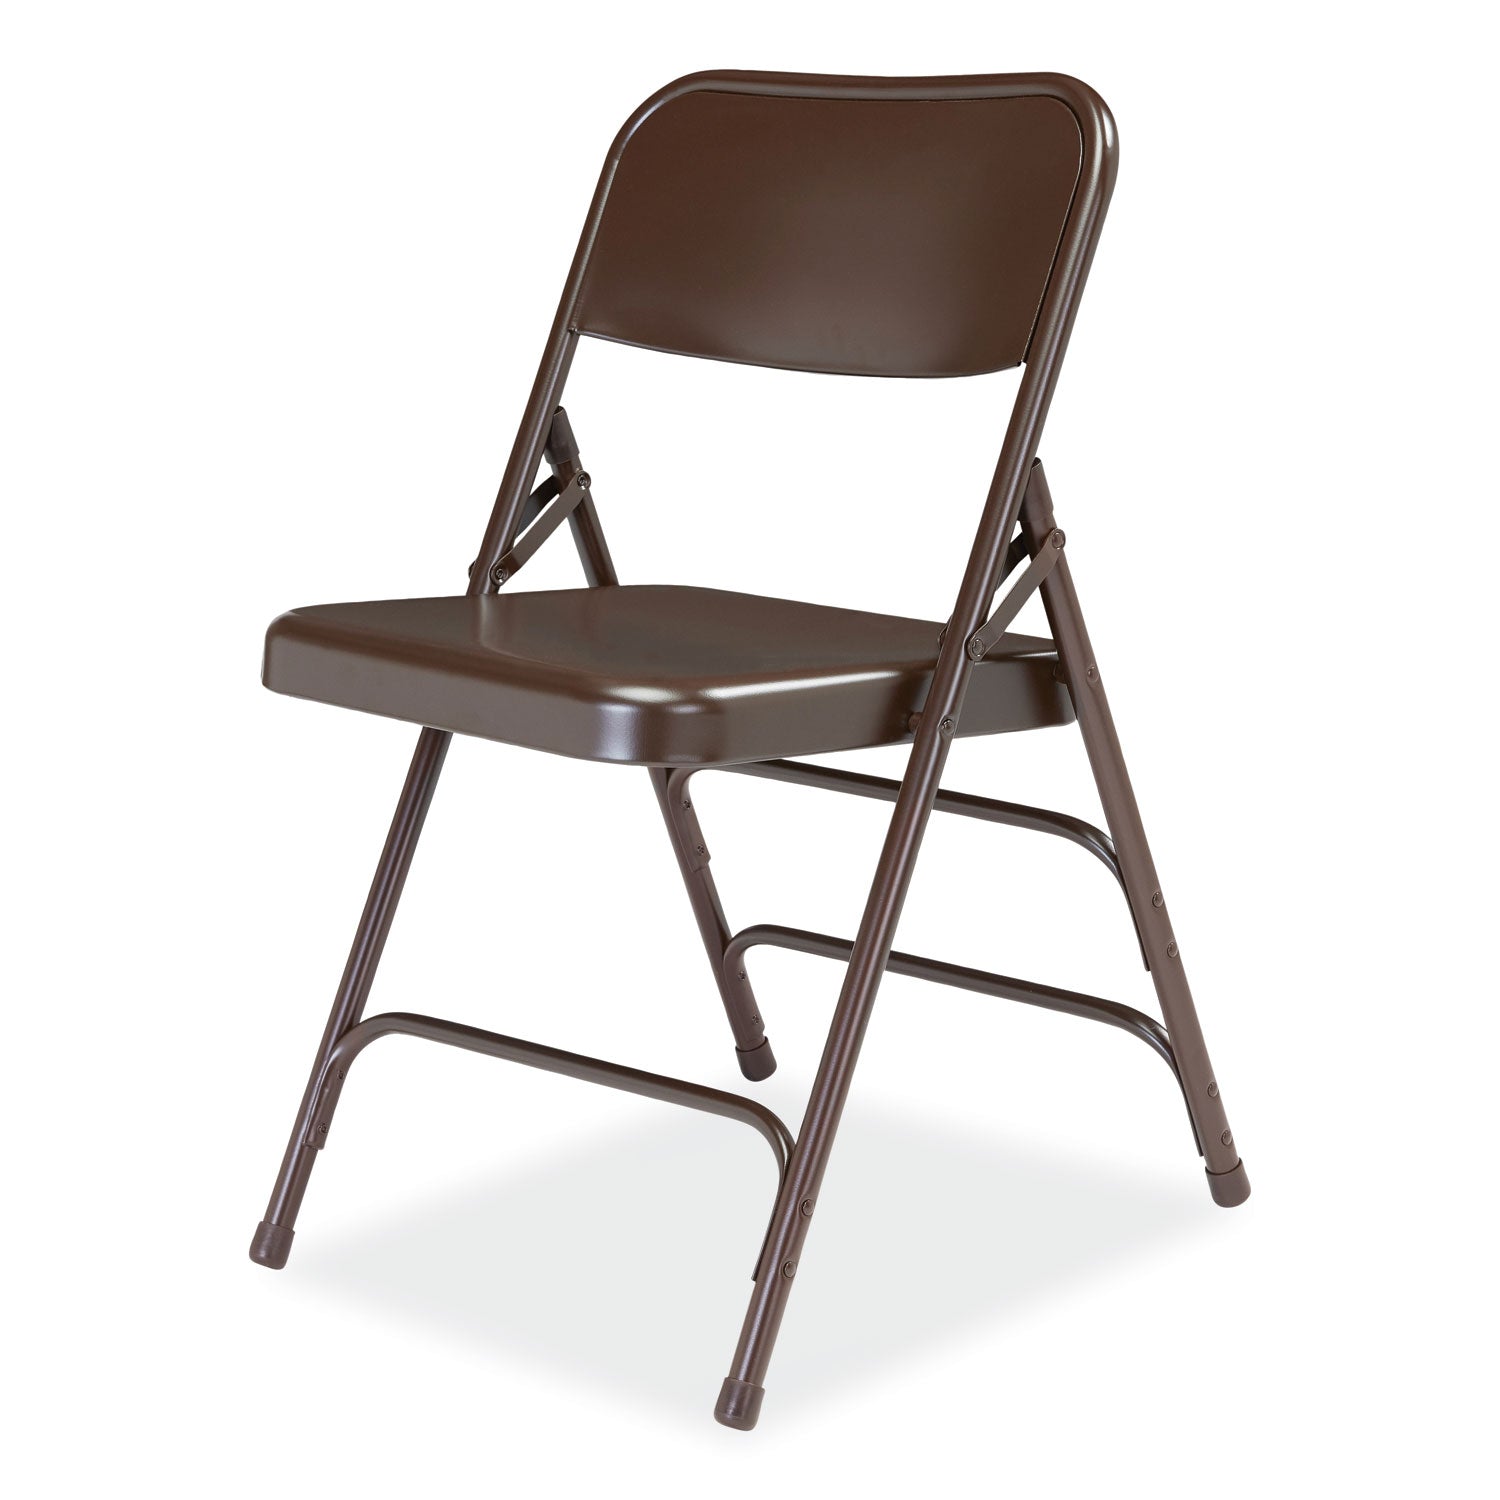 300-series-deluxe-all-steel-triple-brace-folding-chair-supports-480-lb-1725-seat-ht-brown-4-ct-ships-in-1-3-bus-days_nps303 - 3